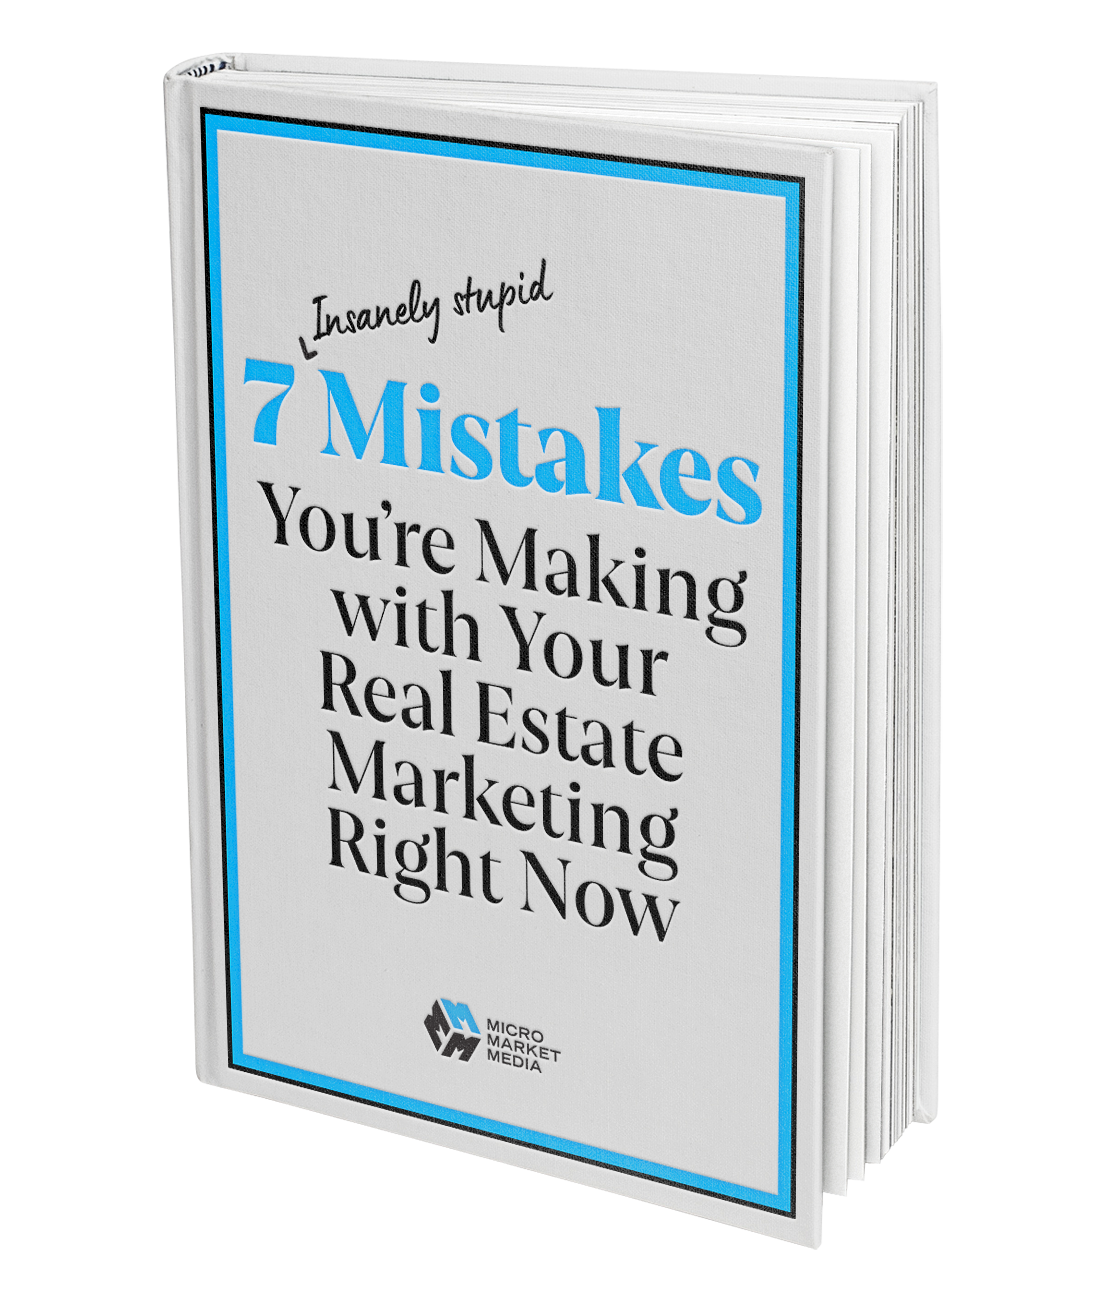 Marketing Mistakes to Avoid for realtors ebook cover